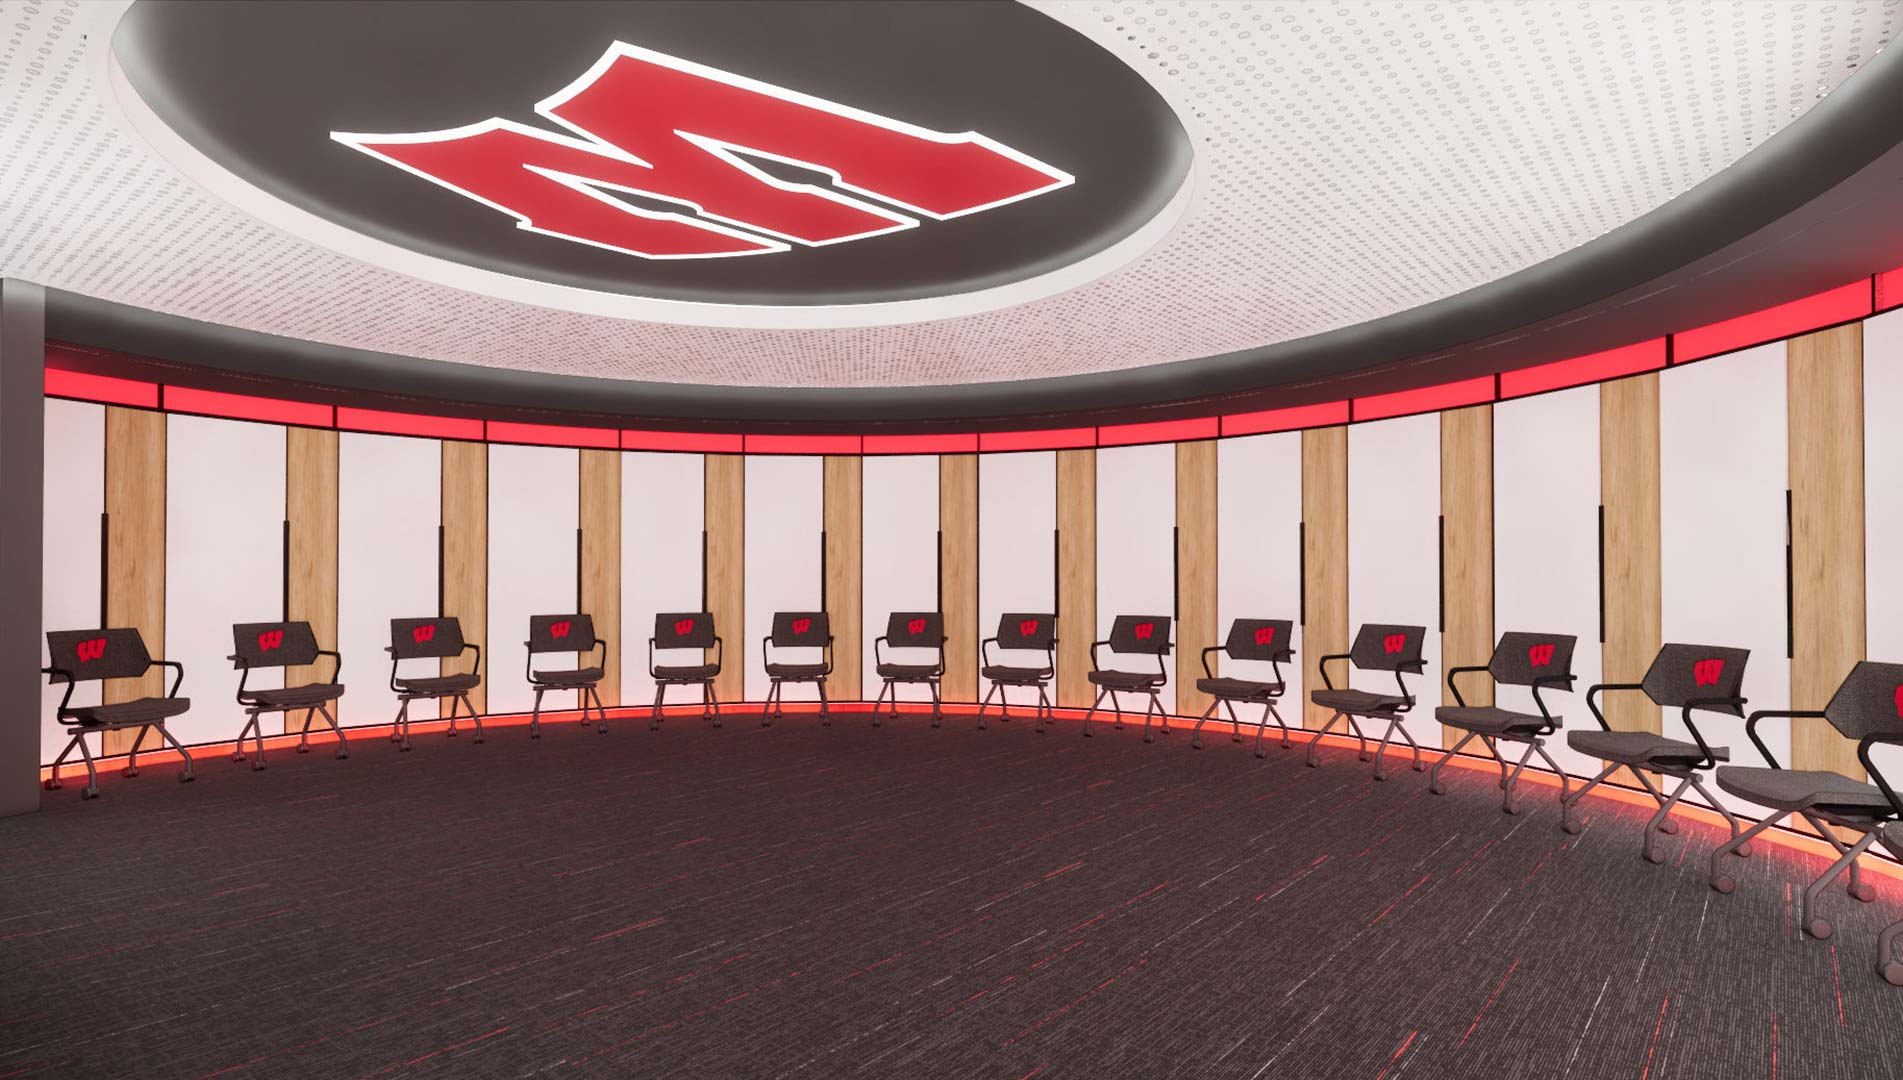 A rendering view of a large circular team locker / changing area with white doors for each locker separated by wood accents. Each locker has a rolling chair in front of it with a red motion W logo. There is carpet on the floor and an accent ceiling that has a very large red and white motion W logo on it.